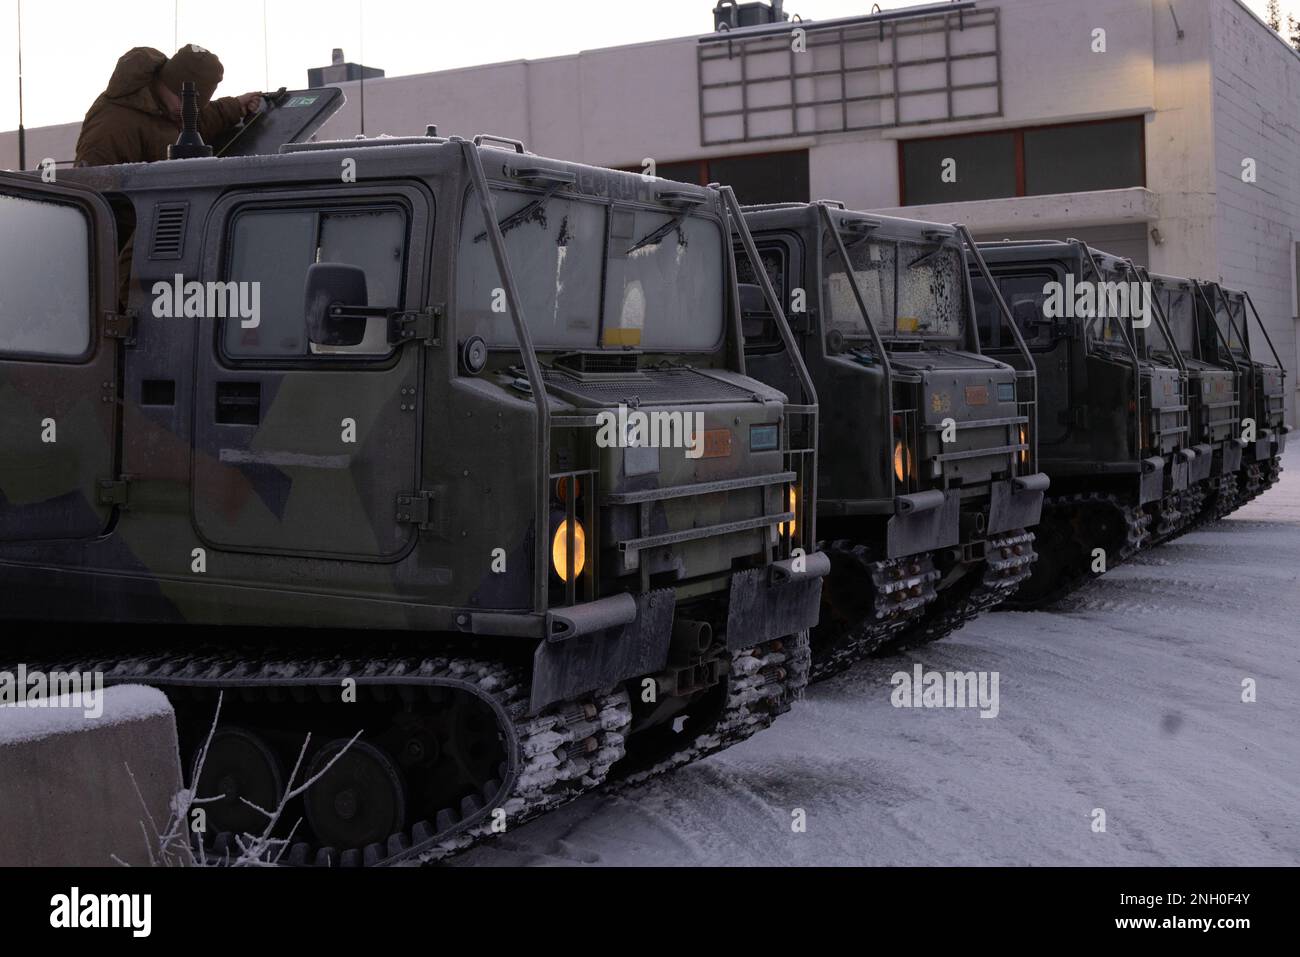 Norwegian Bandvagn 206 tracked vehicles are staged in Setermoen, Norway on Dec. 4, 2022. This communications upgrade enables U.S. Forces to better communicate during operations and exercises as well as set the groundwork for advanced communications capabilities with NATO Allies in the future. Stock Photo